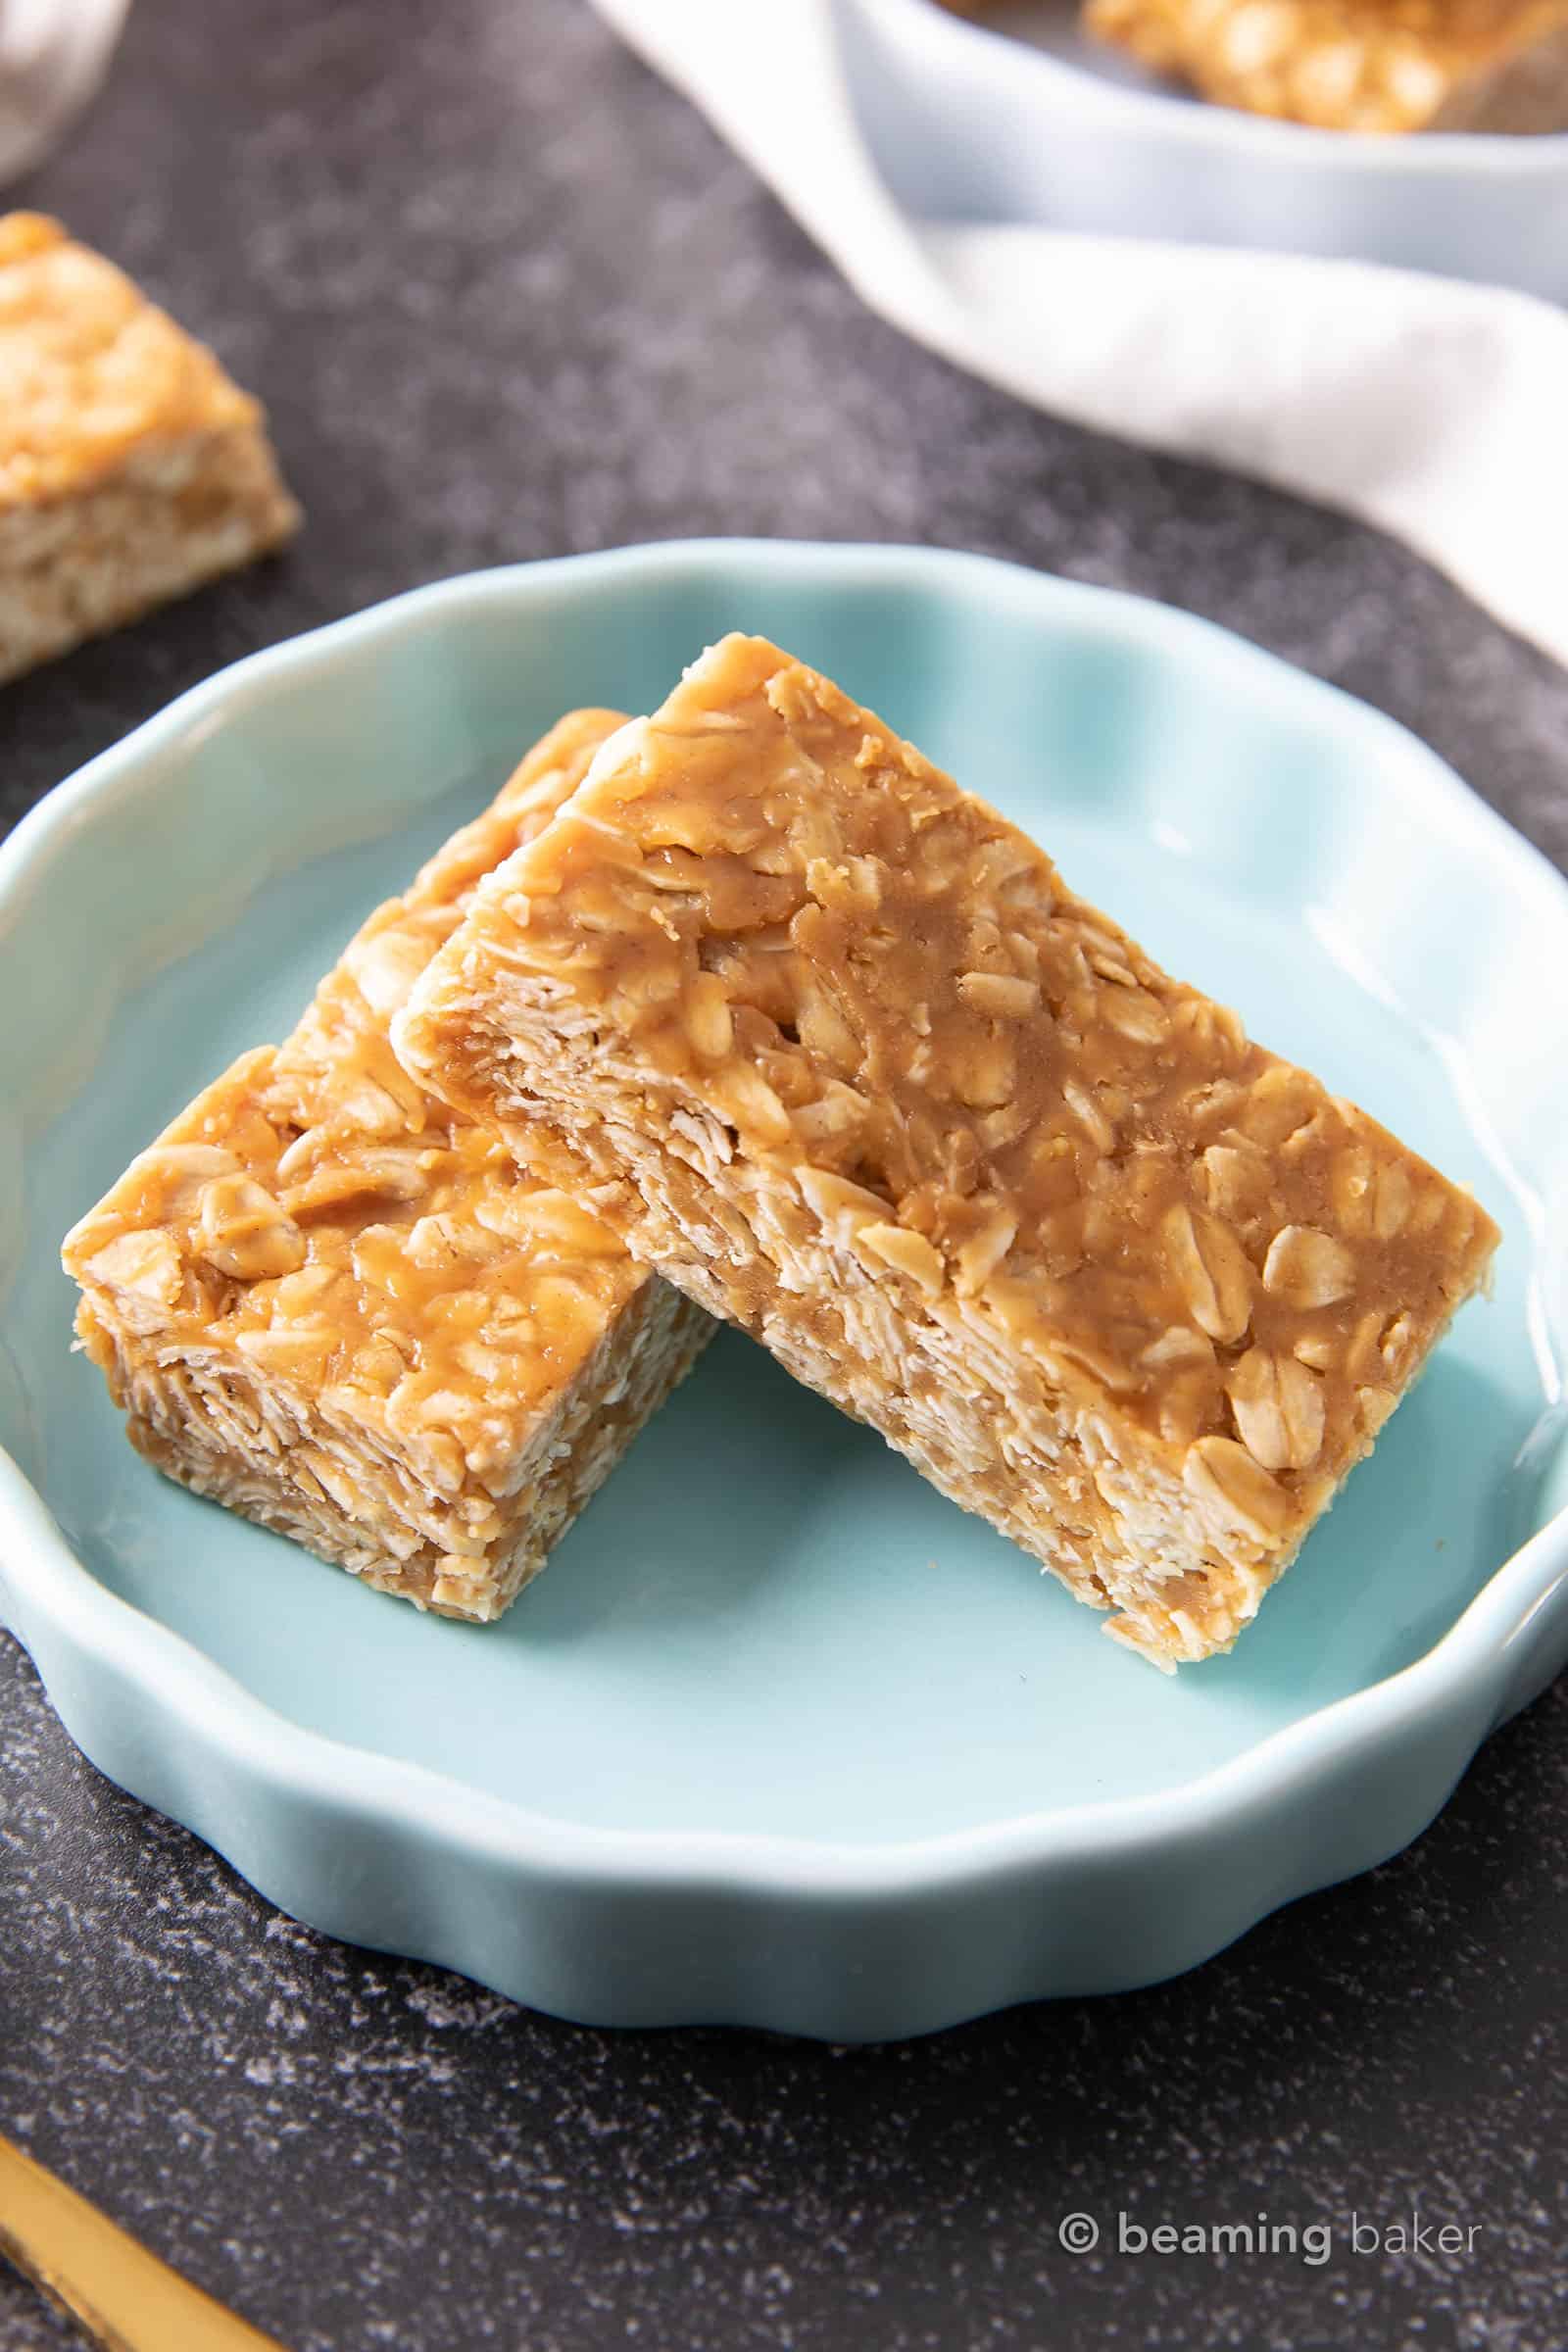 3 Ingredient No Bake Peanut Butter Granola Bars: this homemade peanut butter granola bars recipe is so EASY! The best oatmeal peanut butter granola bars recipe without honey, that tastes like honey roasted peanuts. Healthy, Vegan, Gluten Free. #PeanutButter #GranolaBars #NoBake #Oatmeal | Recipe at BeamingBaker.com